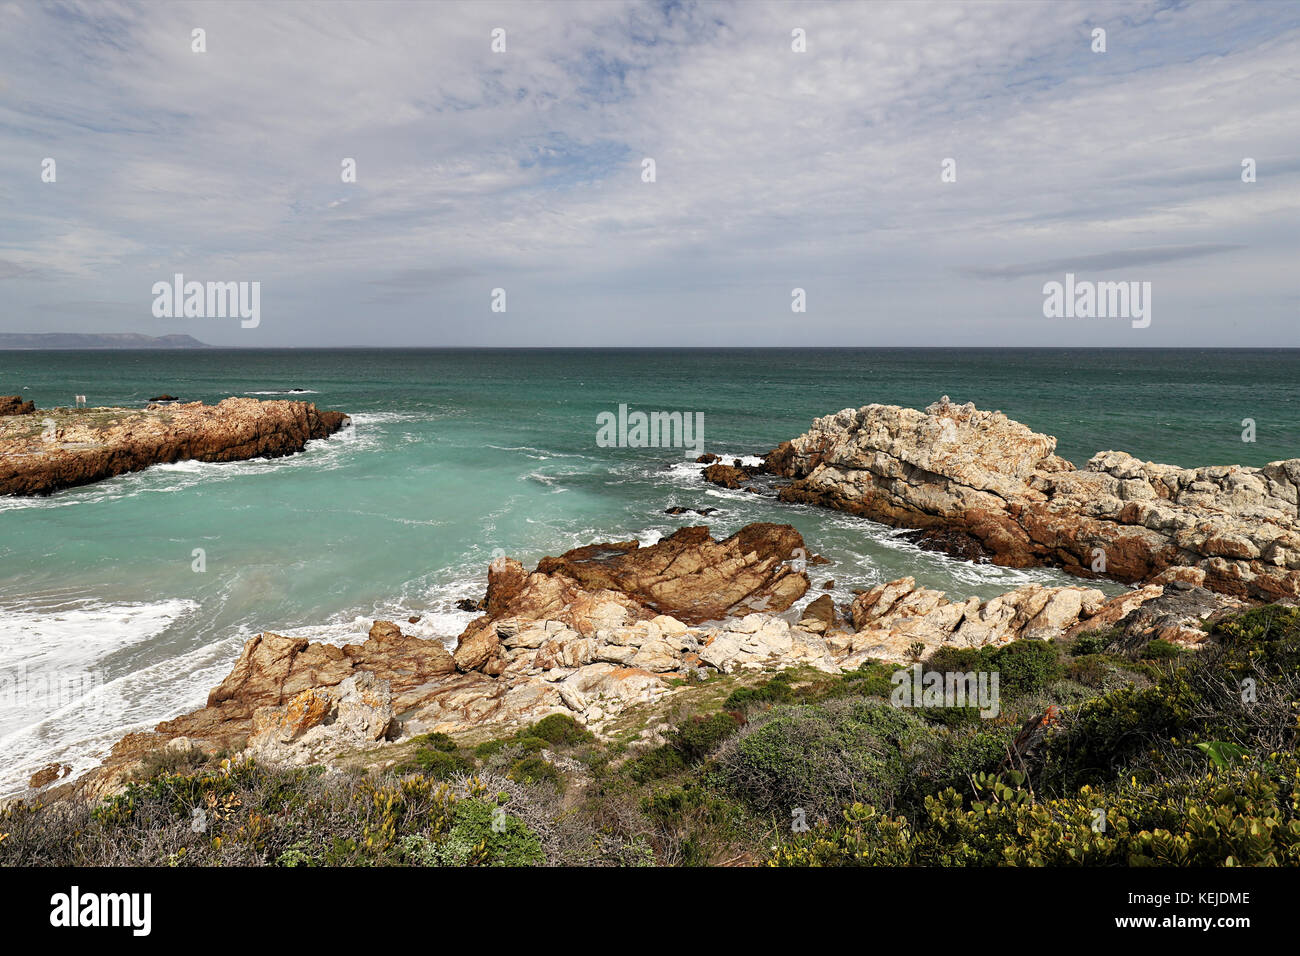 Ocean and coast landscape in Hermanus, South Africa Stock Photo